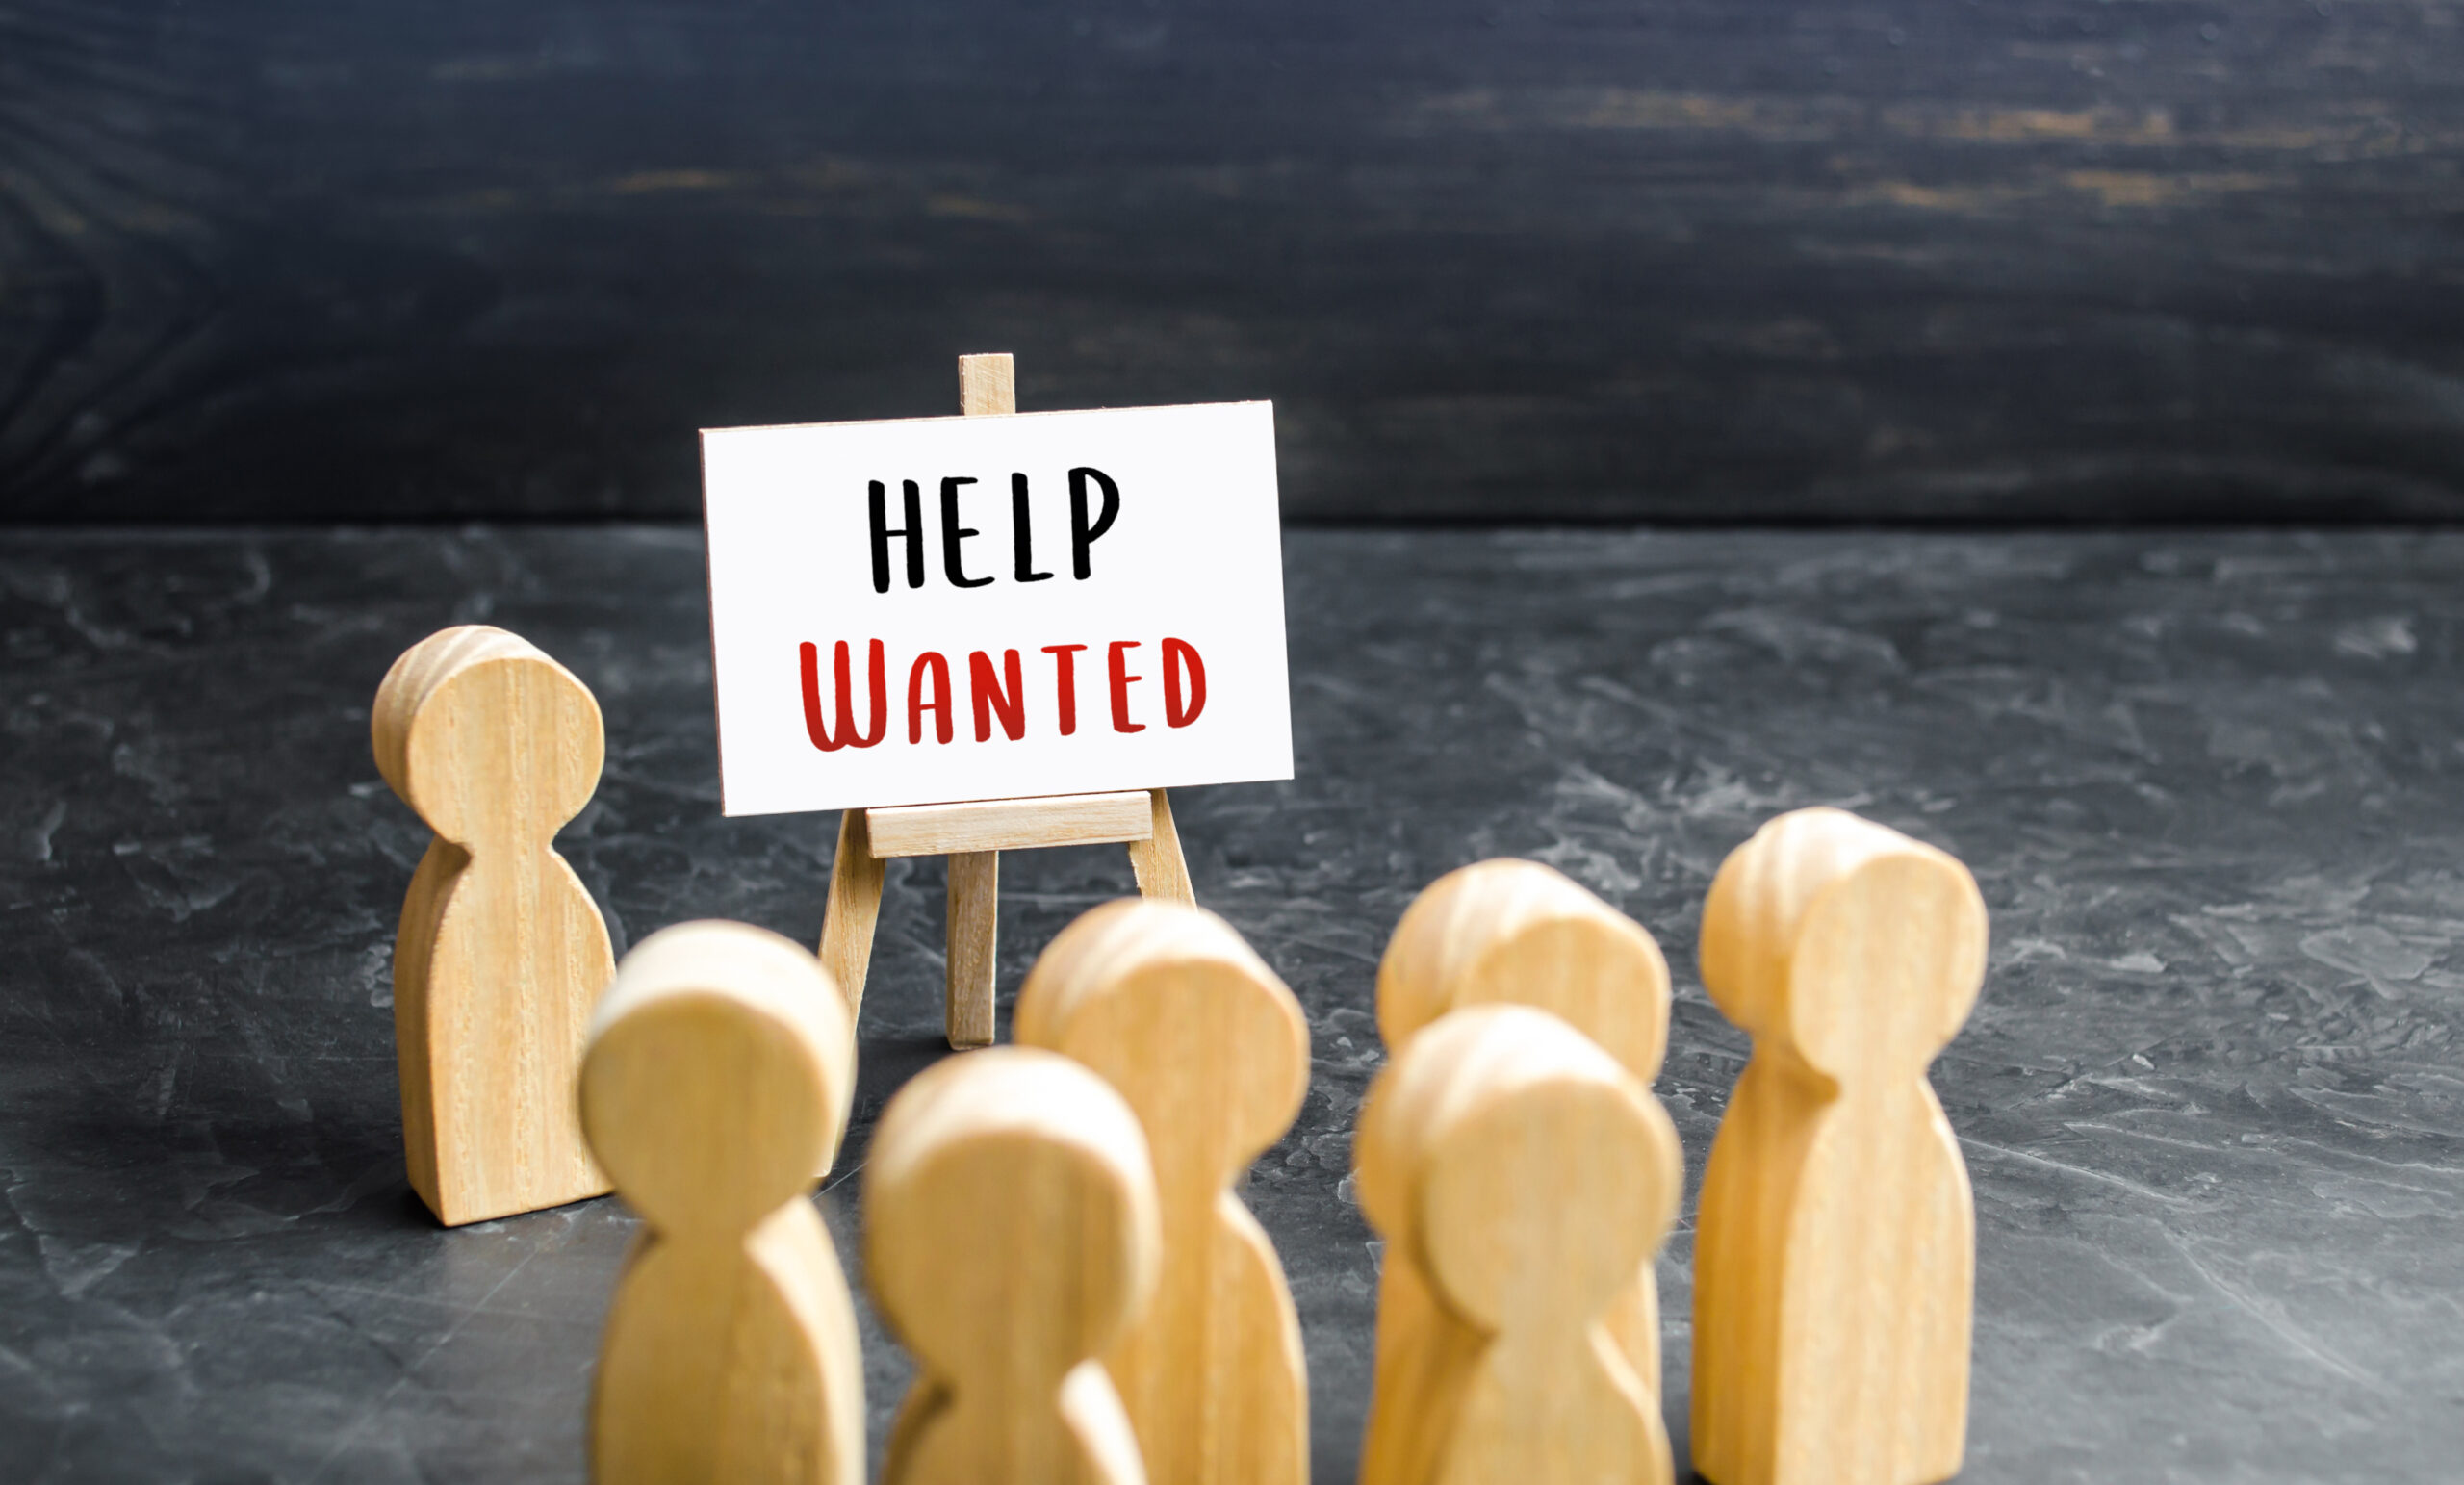 Help Wanted image to signify recruiting strategies for manufacturers.